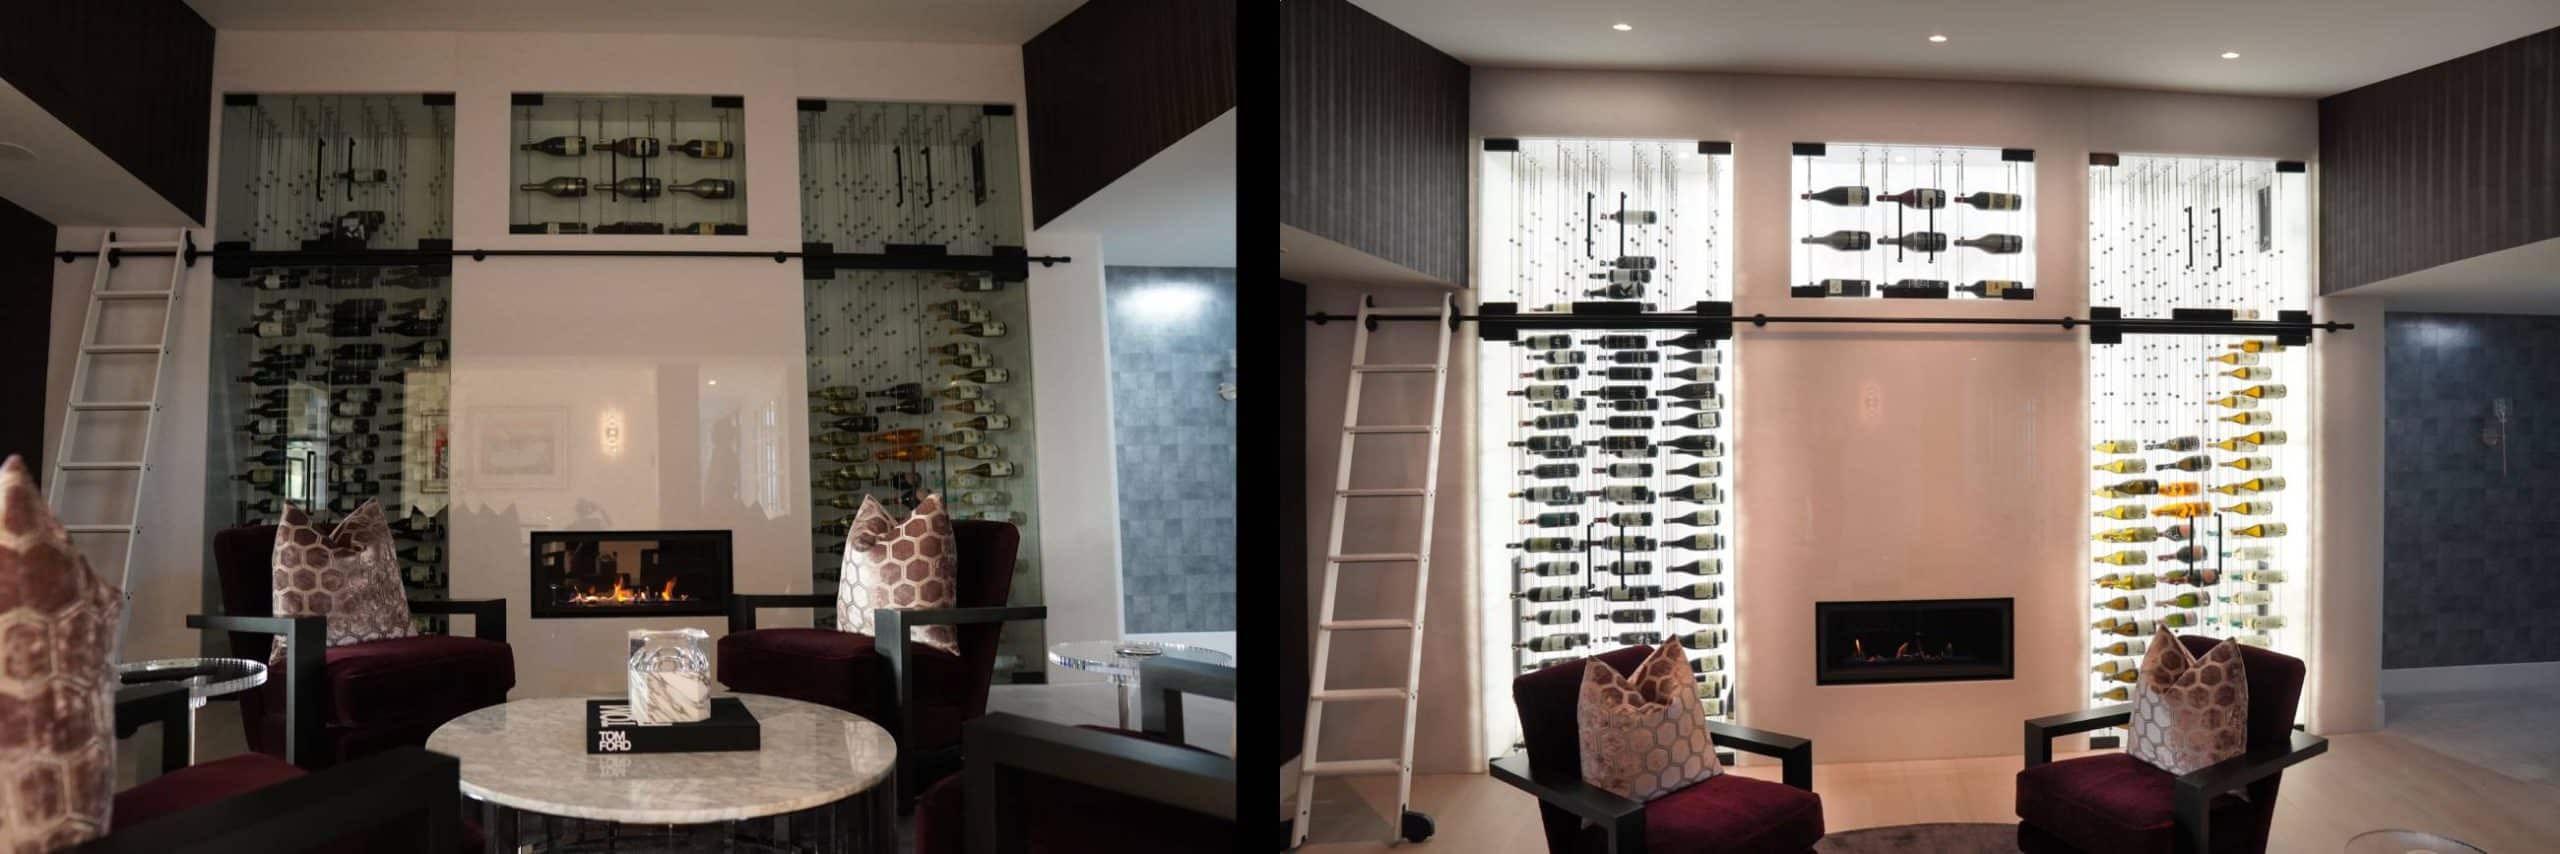 Wine Cellar Innovations Before and After